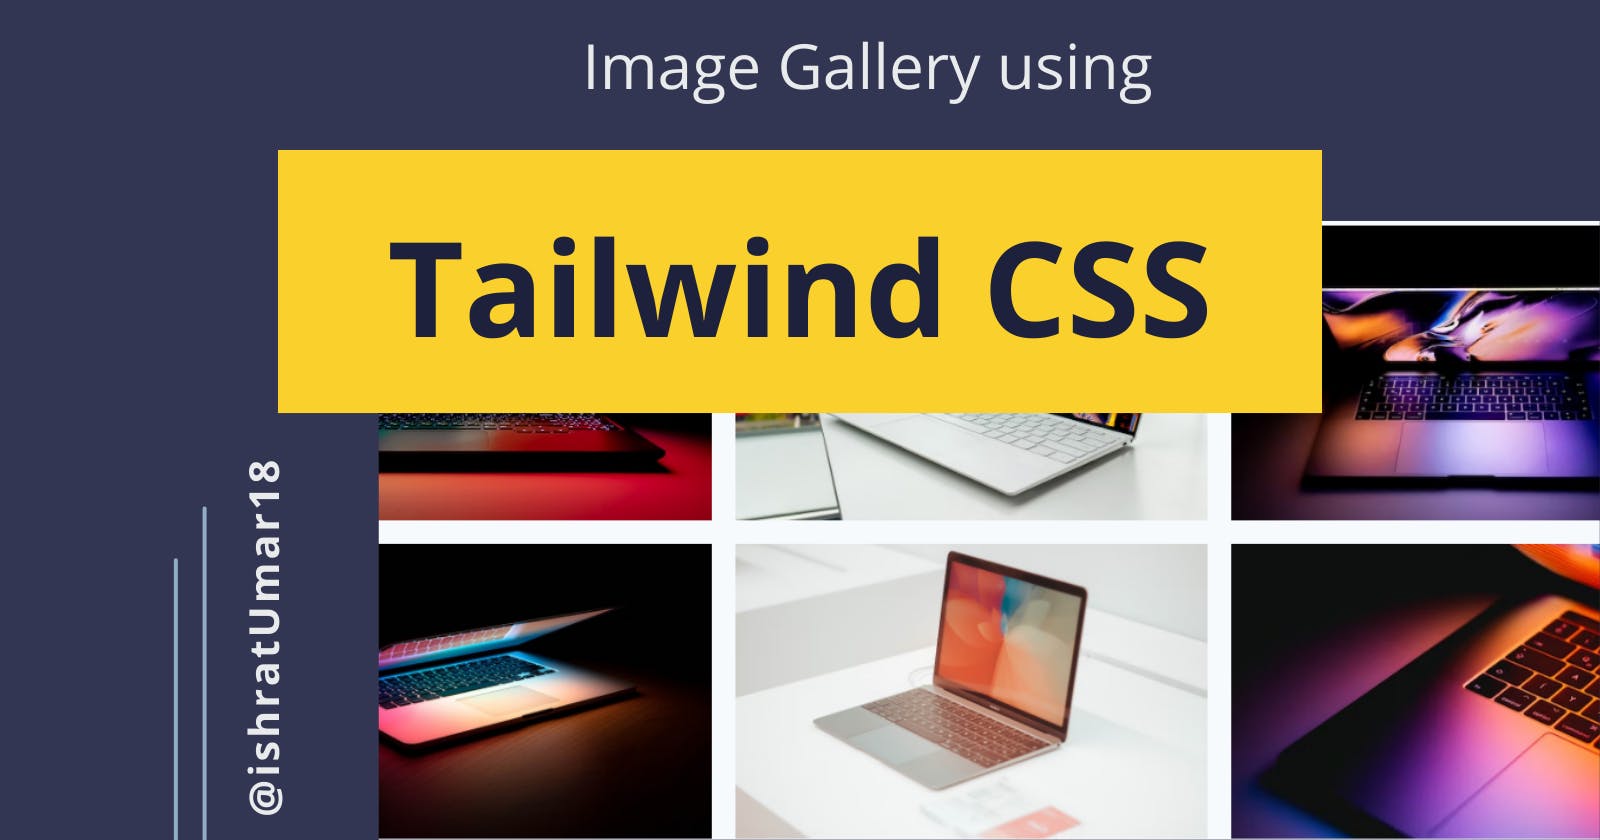 How to create an image gallery using Tailwind CSS